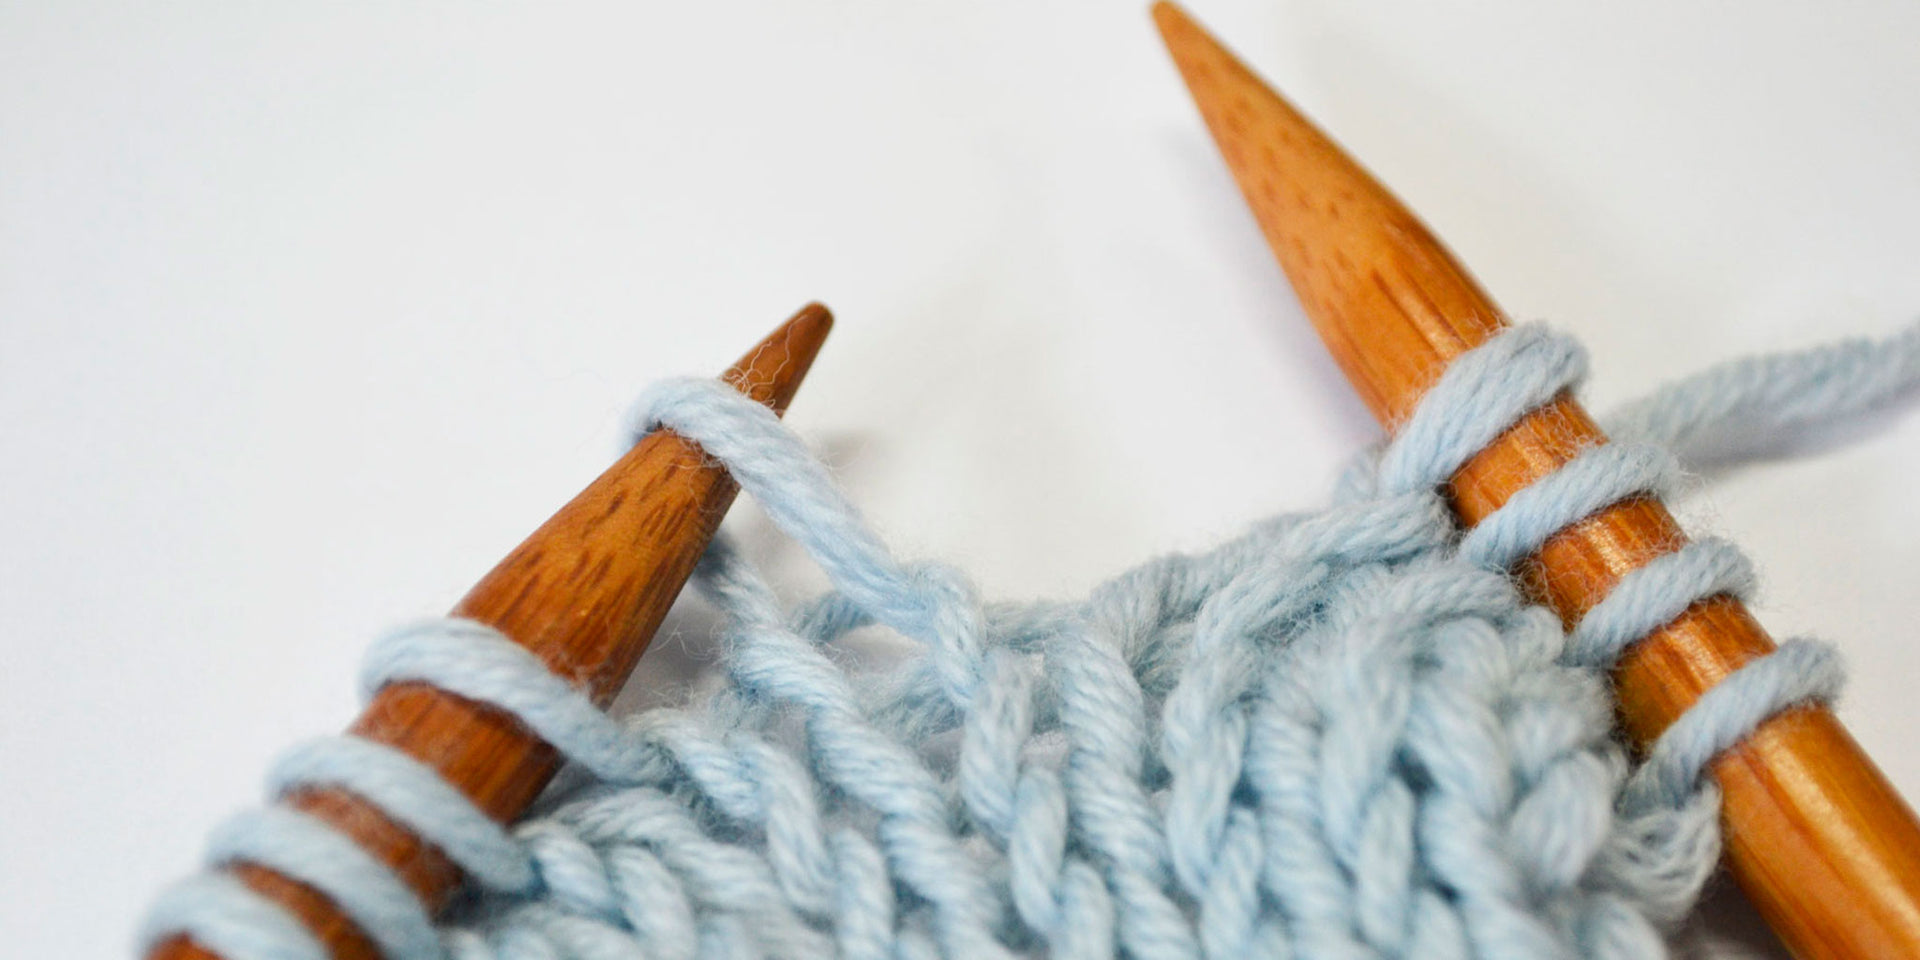 7 Essential Tools for Knitters